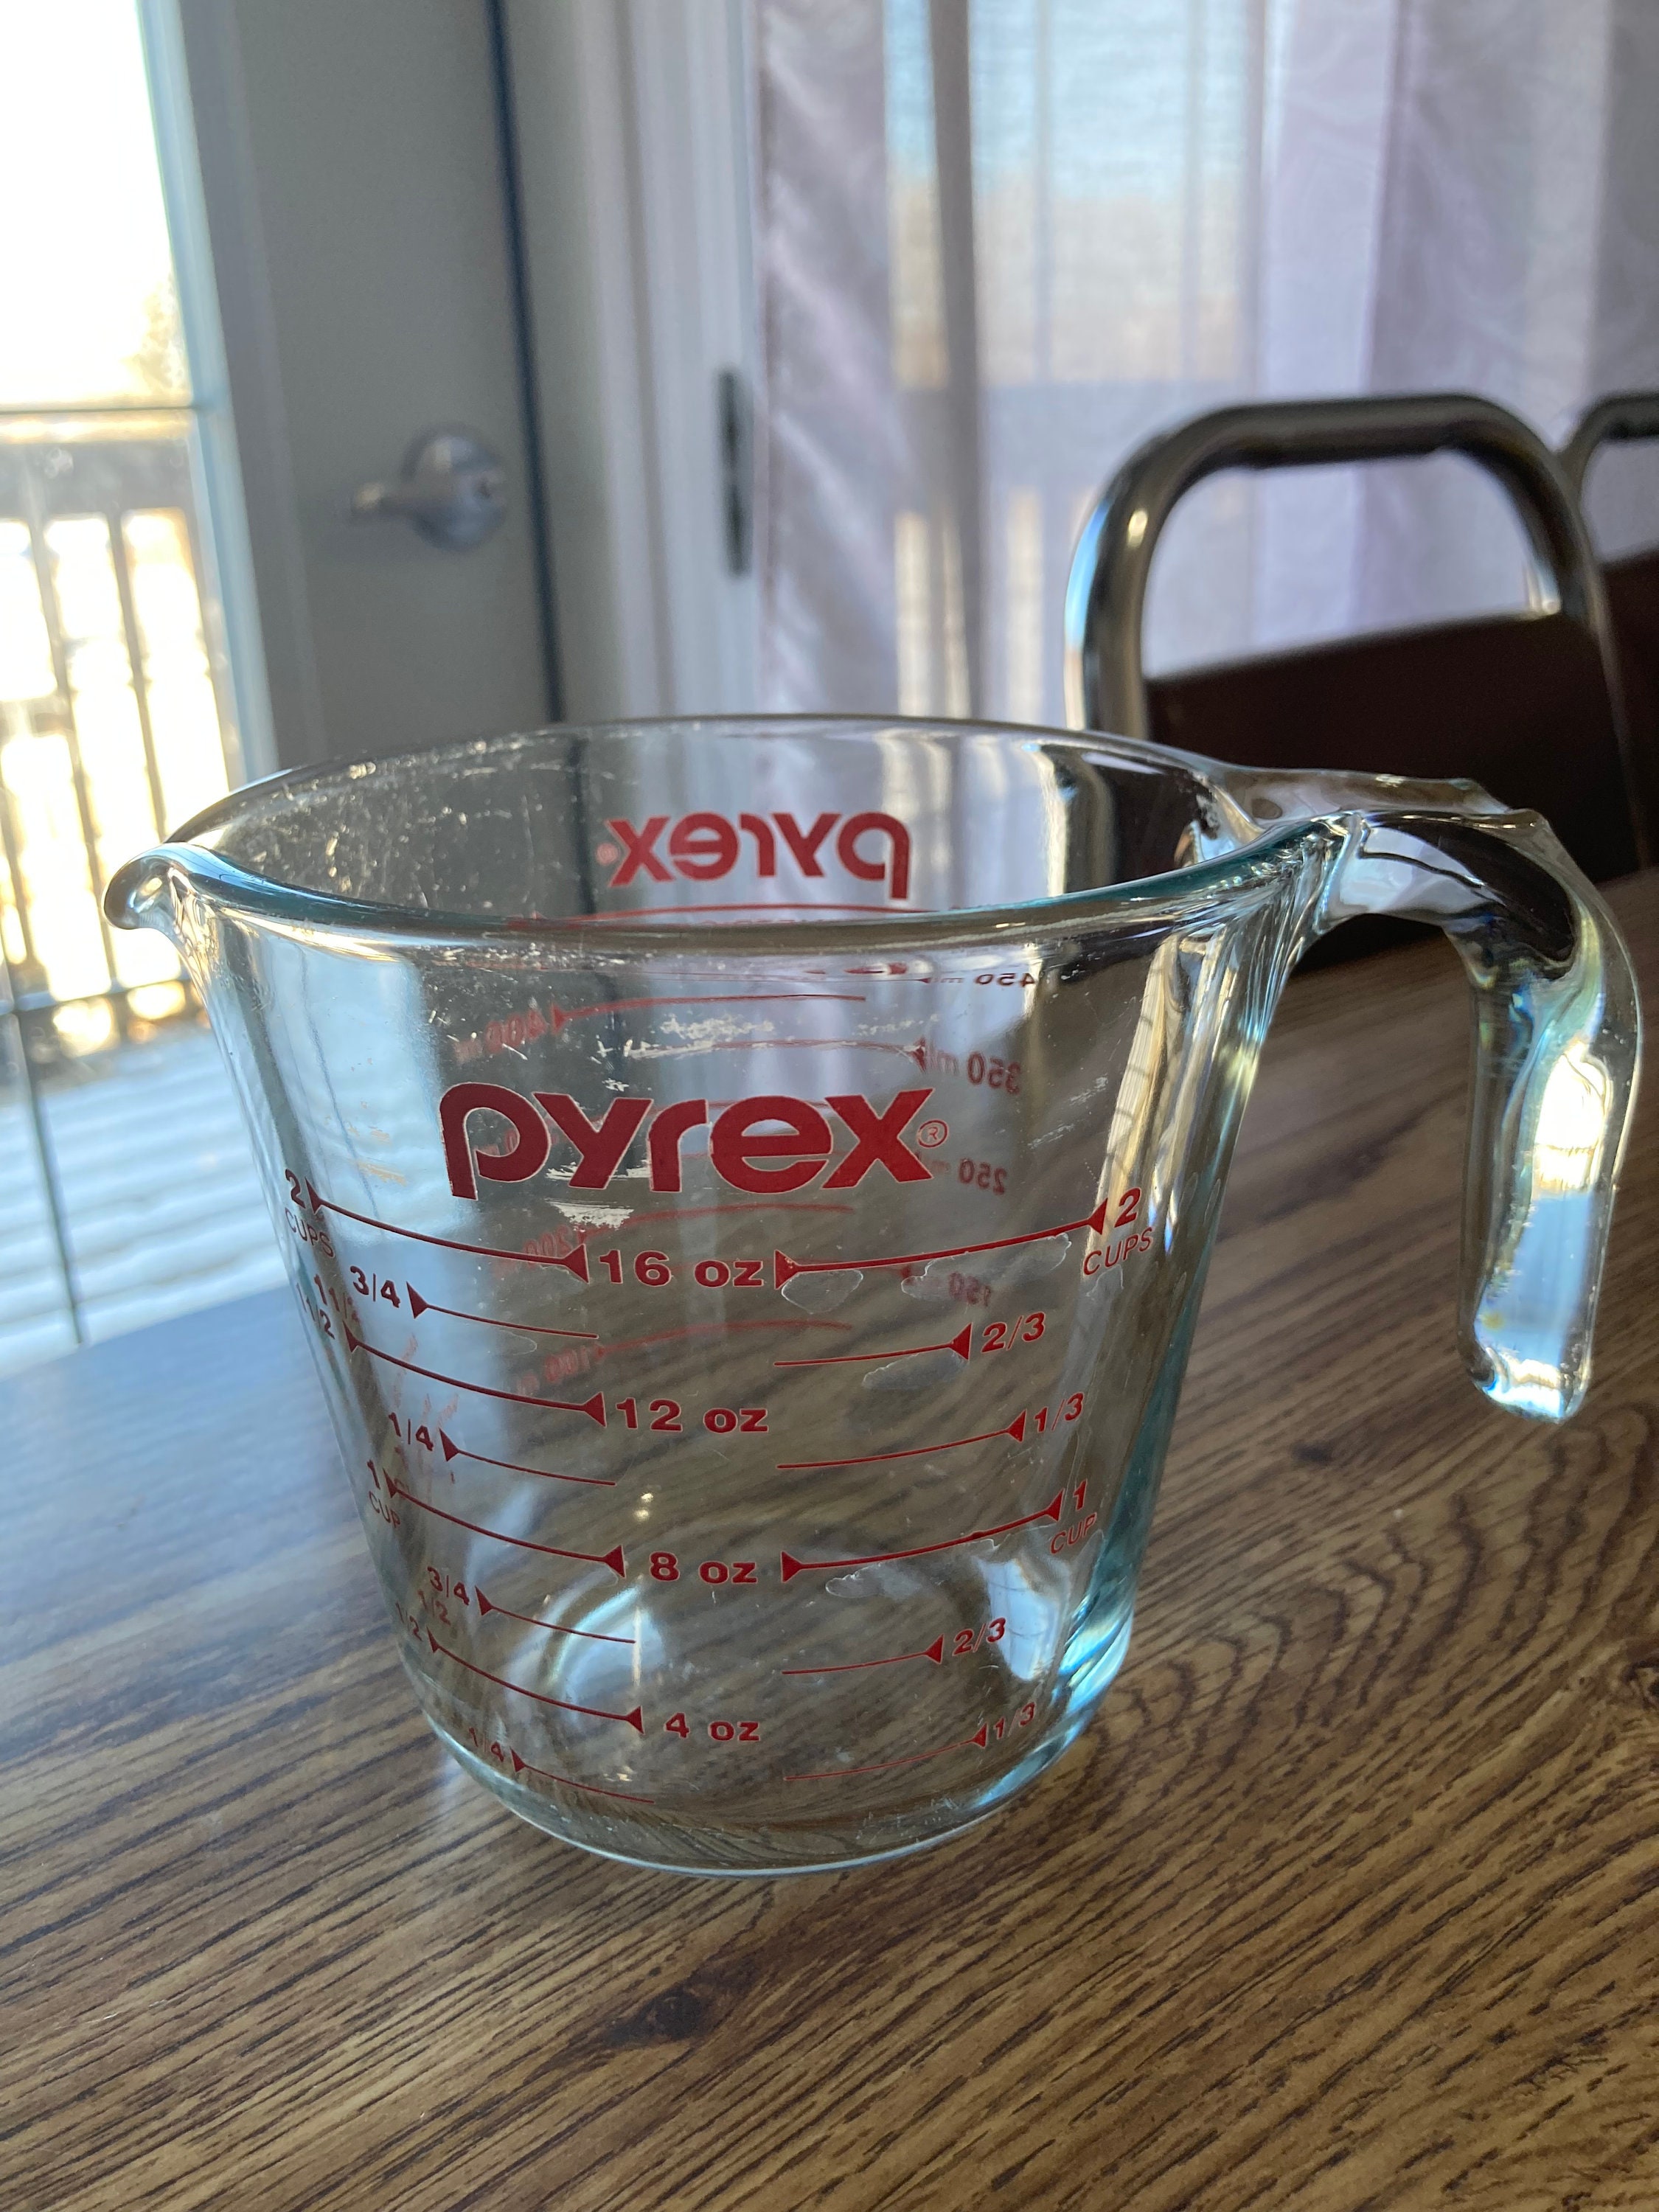 2 Cup Measuring Cup: Clear with Red Print